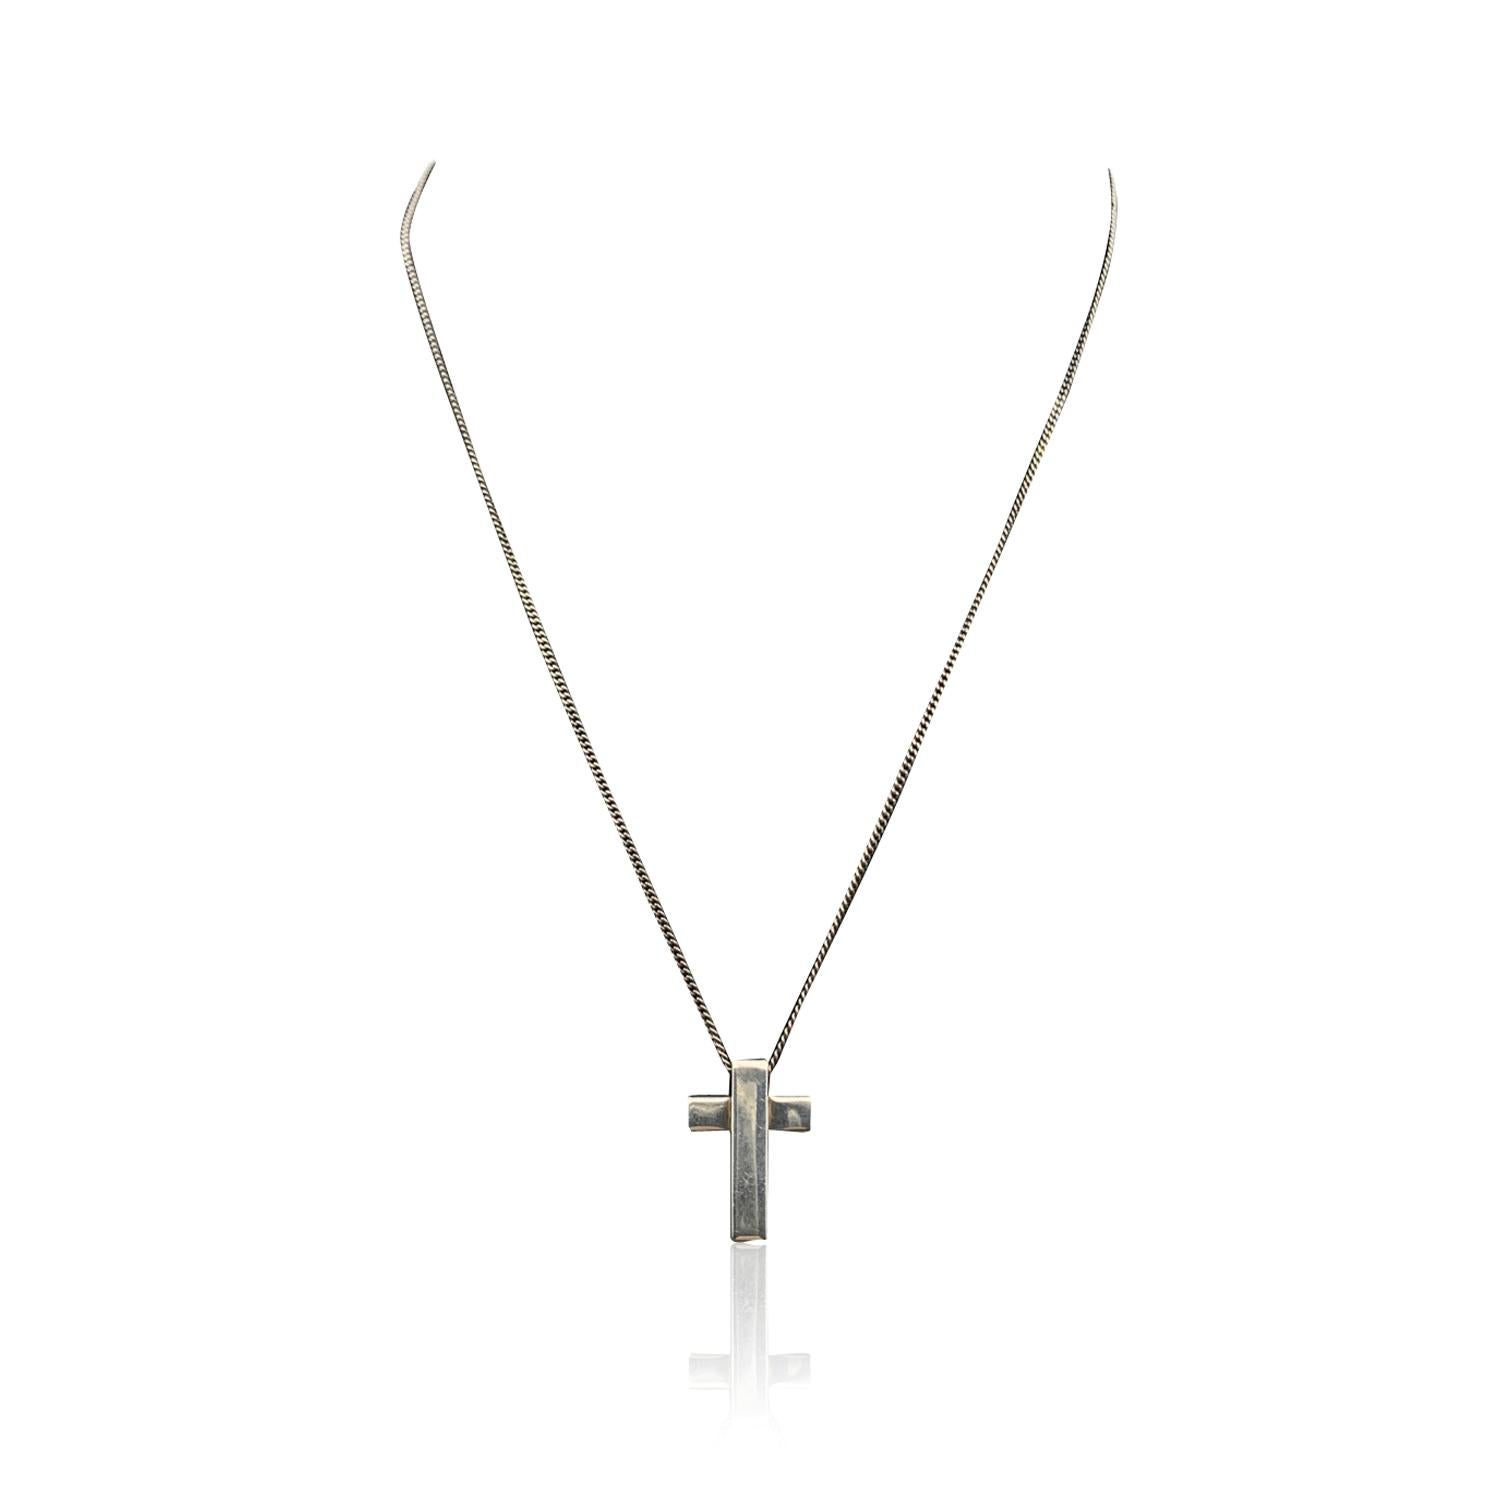 Classic unisex chain necklace by Gucci, with sterling silver cross pendant. Lobster closure. Total length of the chain: 18.5 inches - 47 cm. Pendant height: 1 inch - 2.5 cm. 'Gucci - made in Italy' and '925' hallmark engraved on the